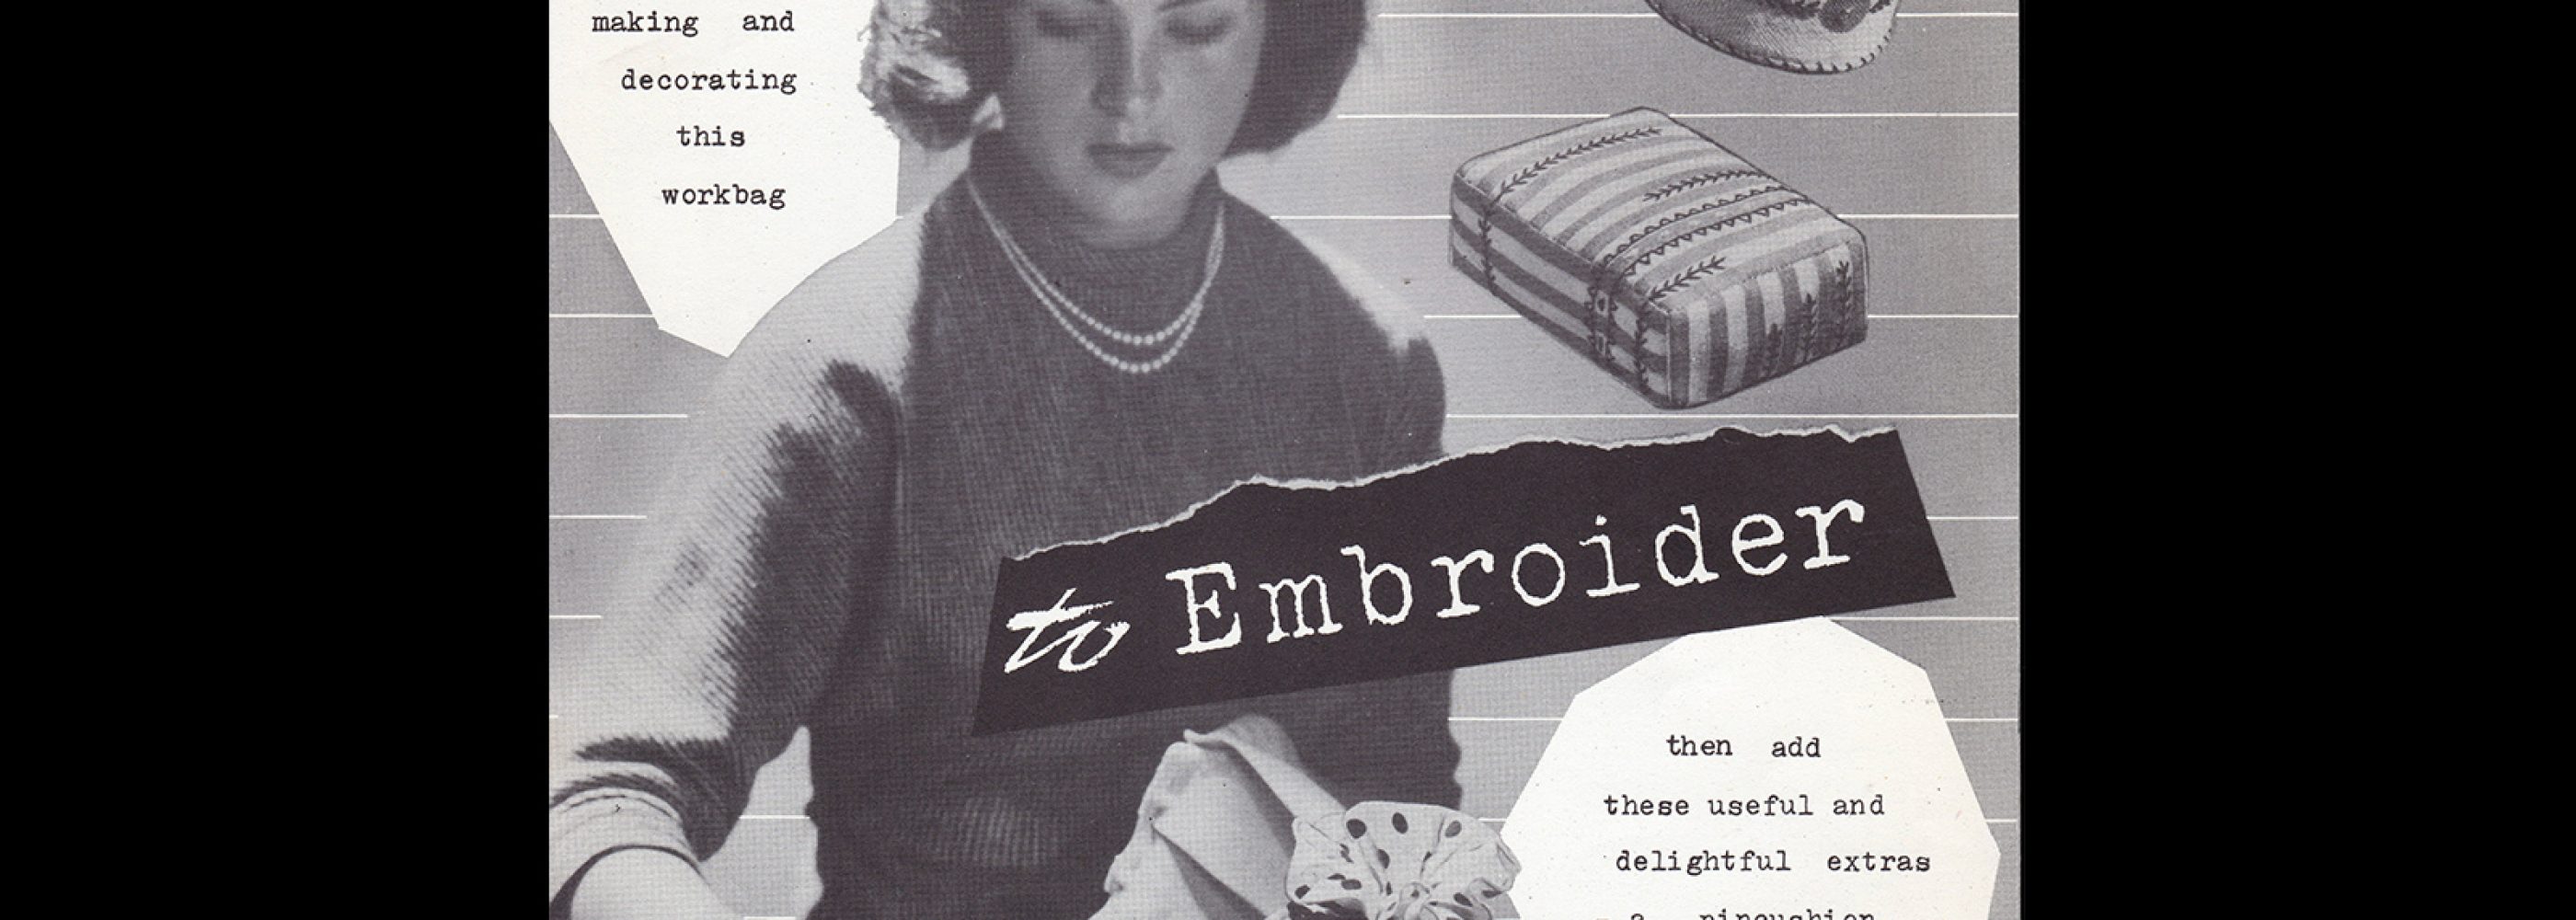 And So To Embroider Bulletin 7b, 1950s